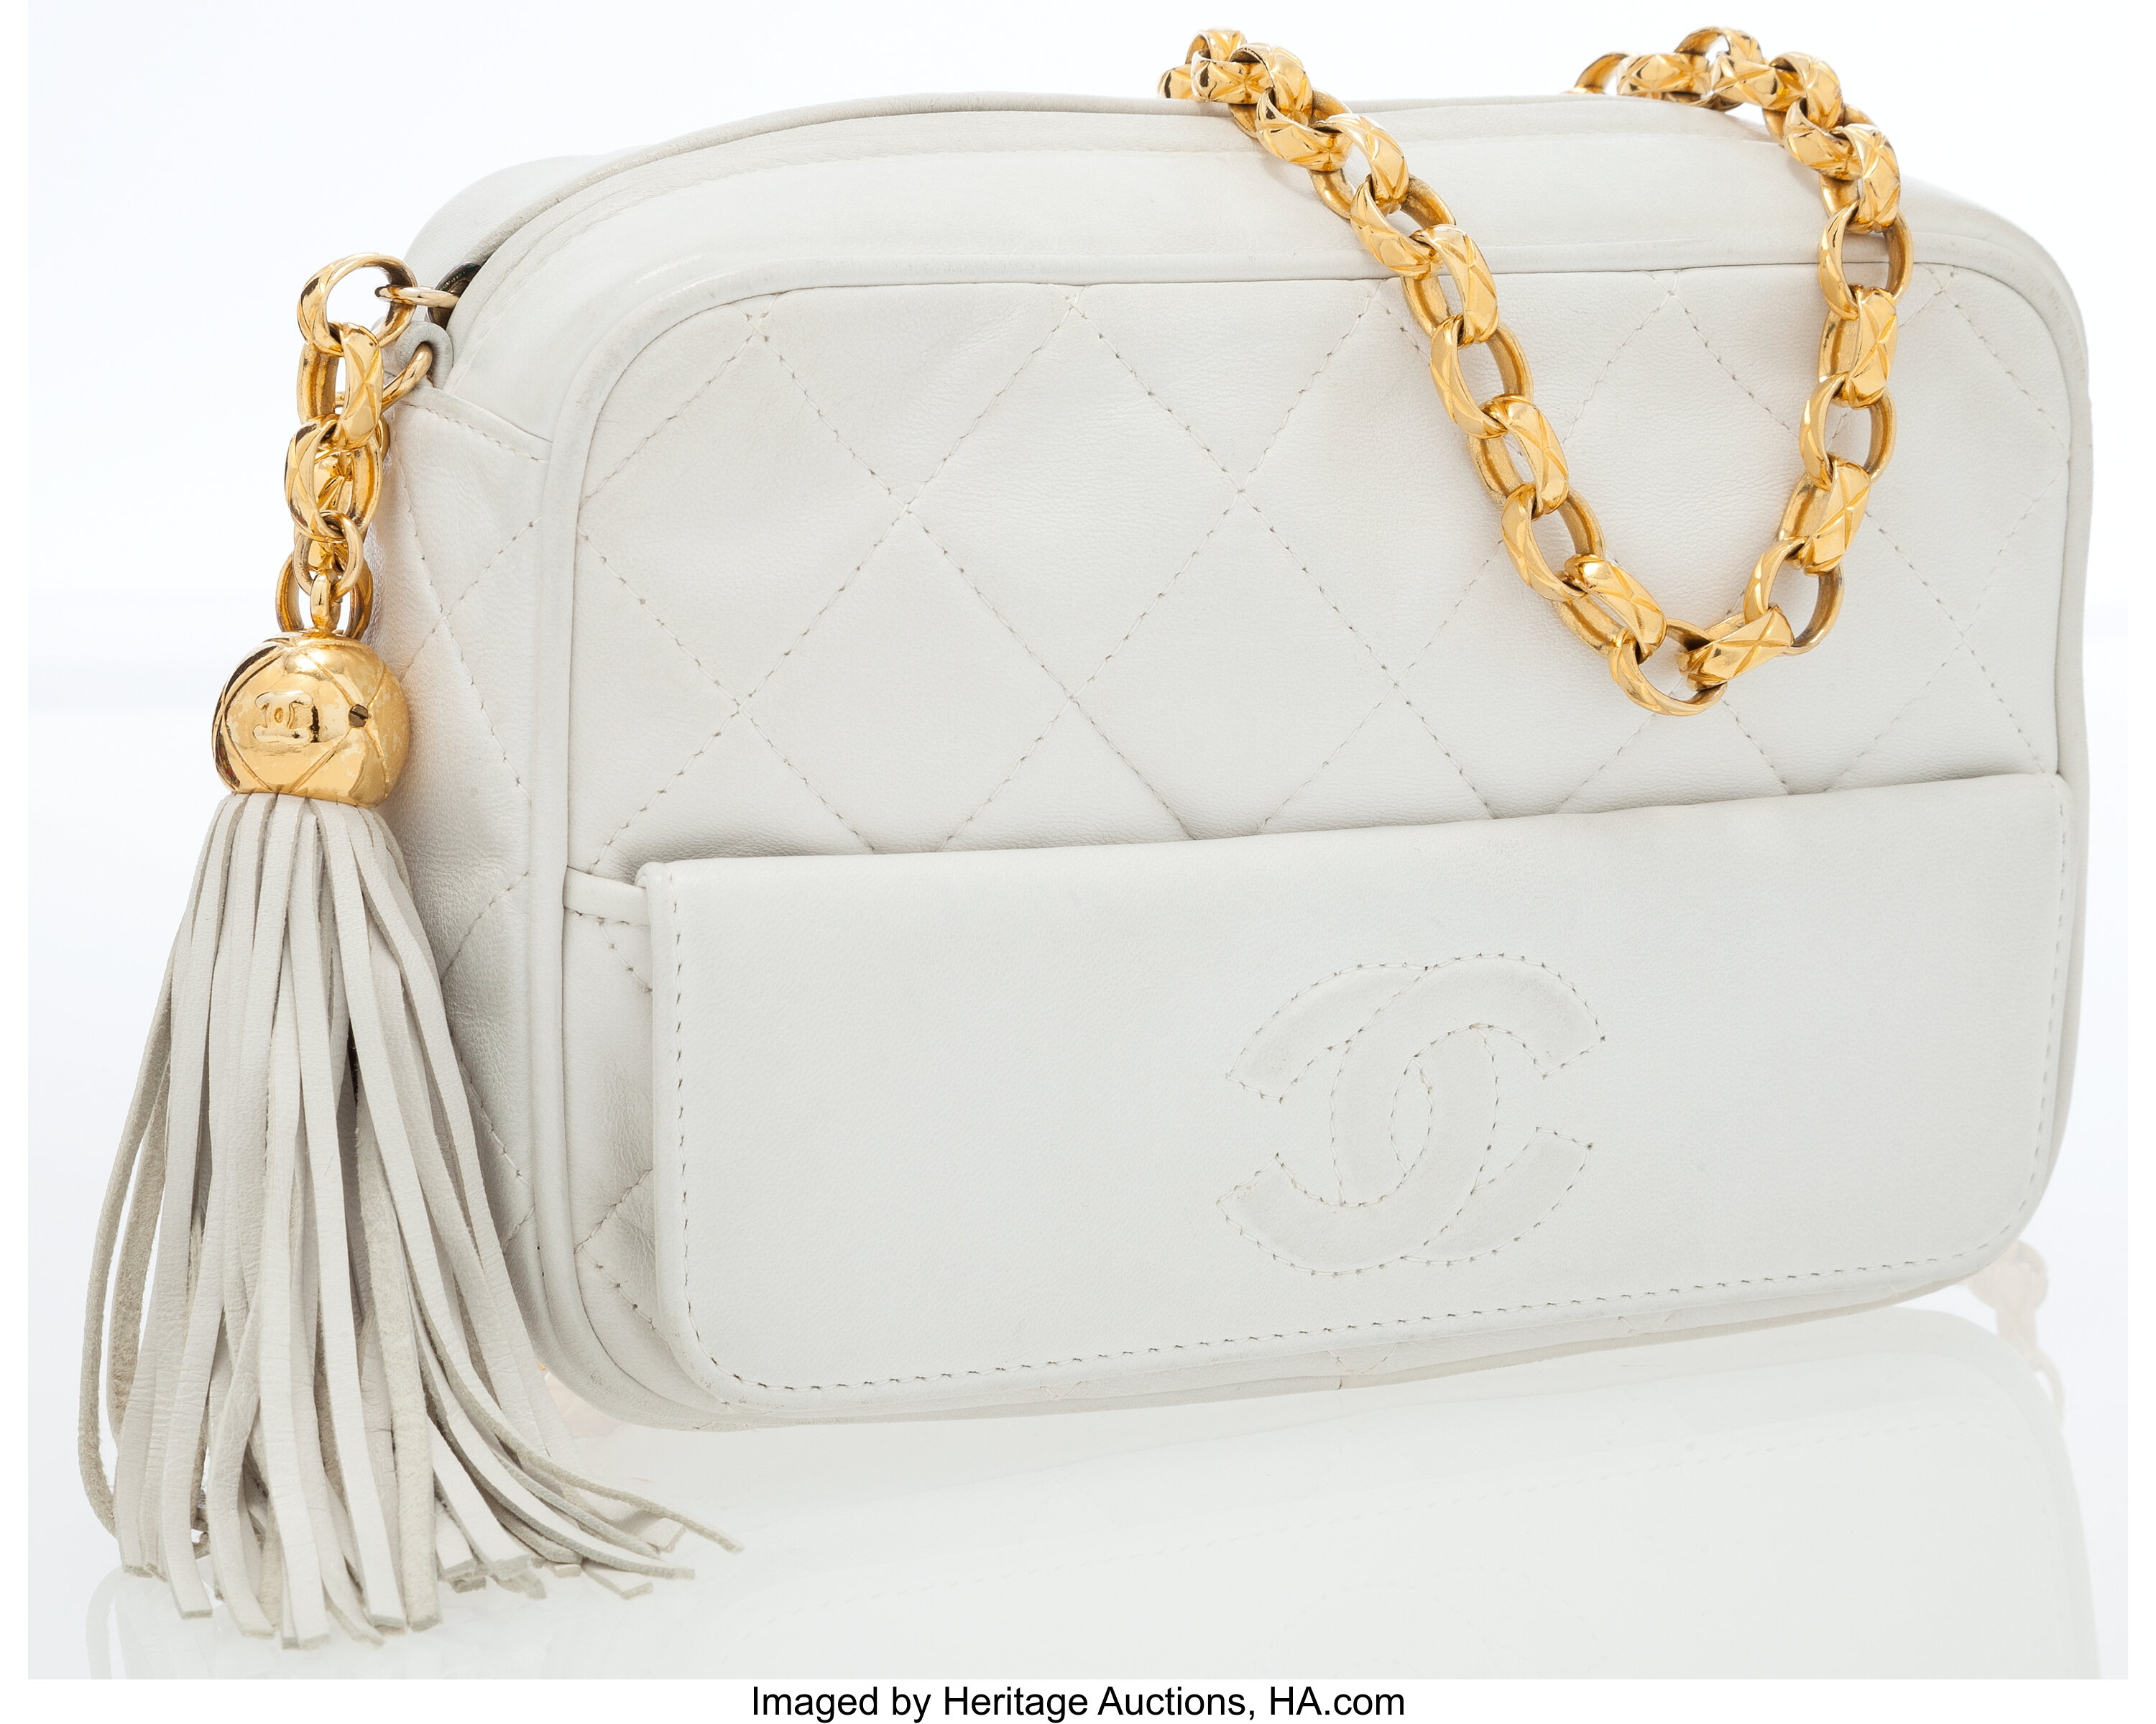 Chanel White Quilted Lambskin Leather Camera Bag with Tassel, Lot #76012